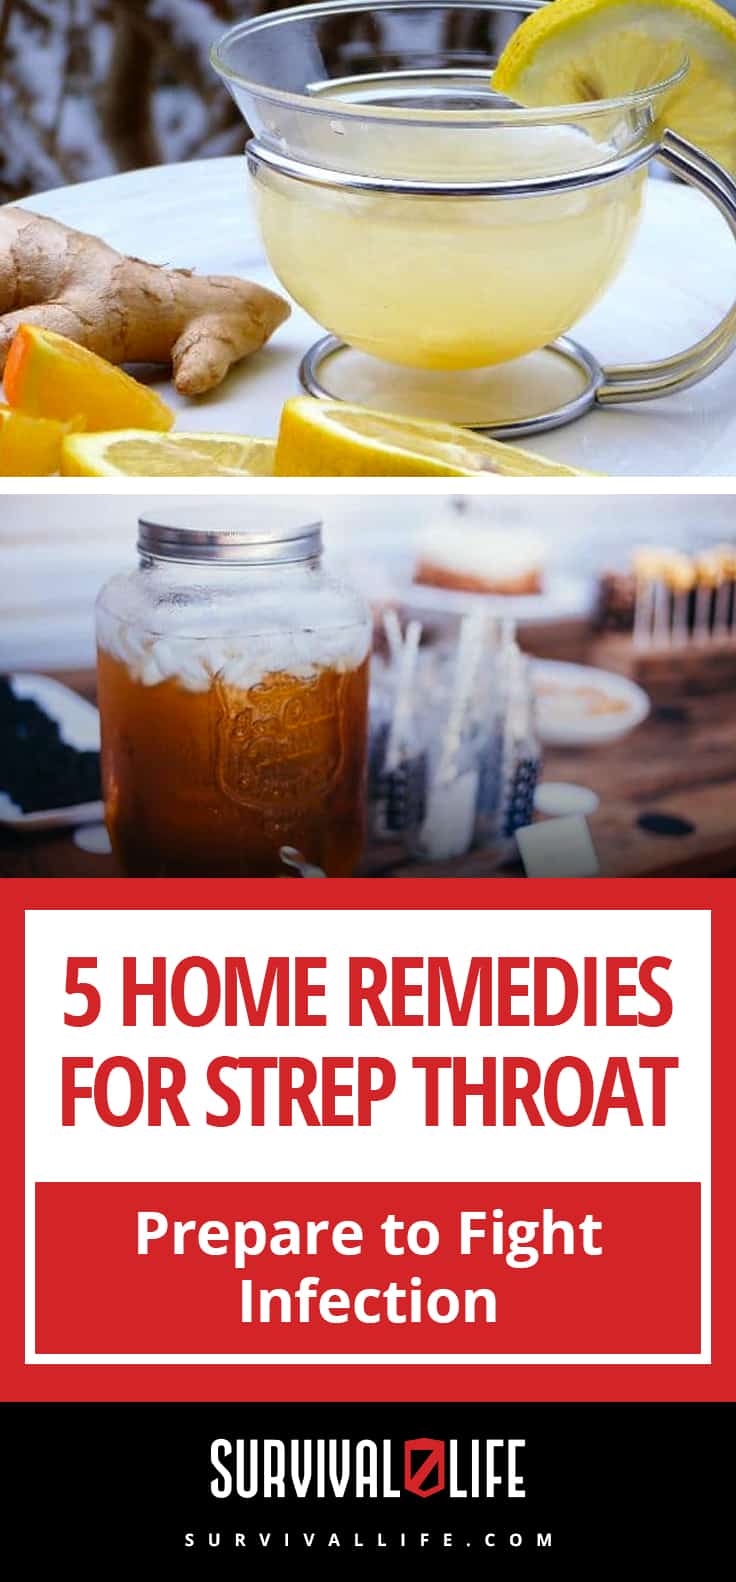 5 Home Remedies for Strep Throat | Prepare to Fight Infection